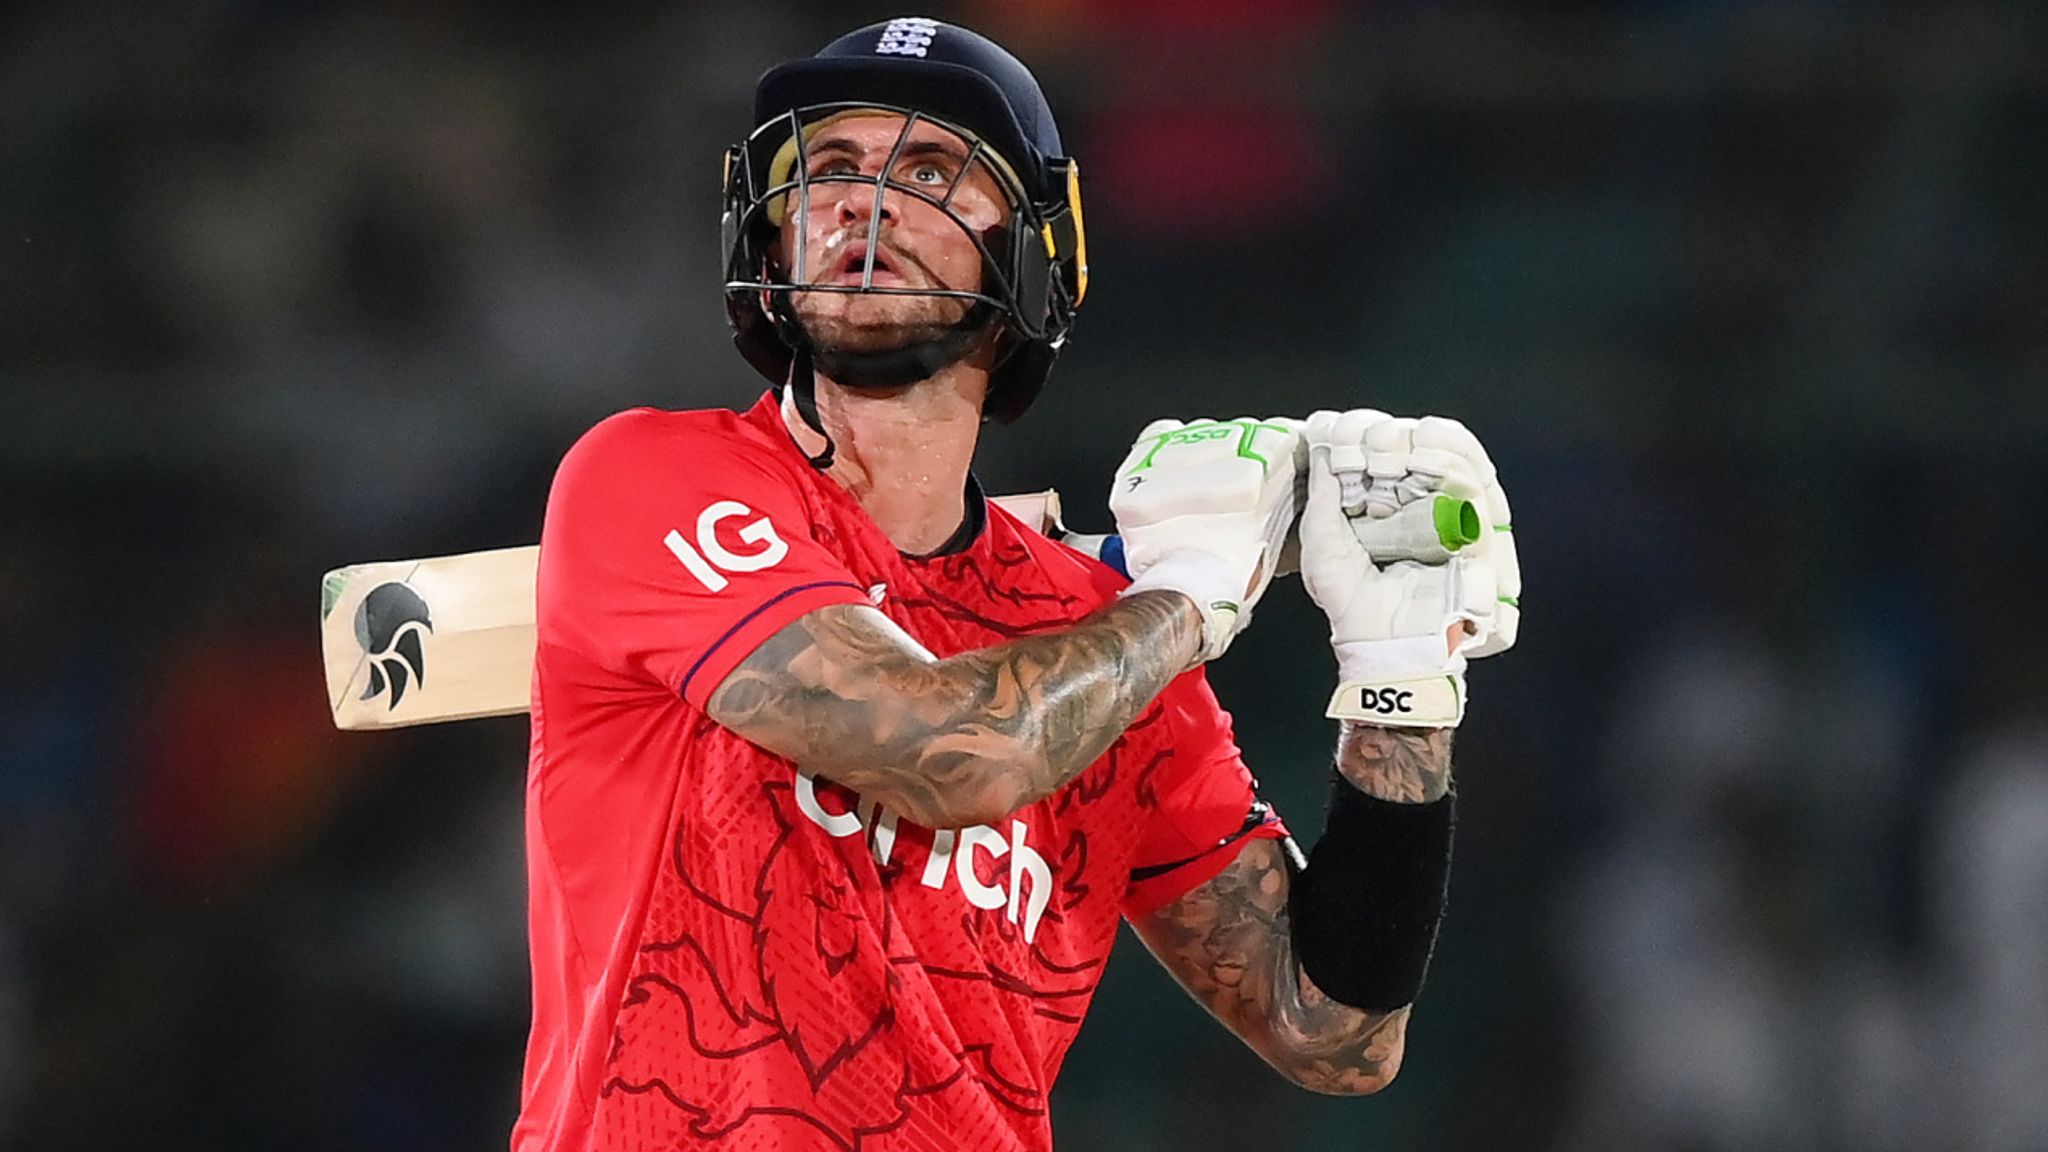 2023 World Cup: England’s T20 WC hero Alex Hales not interested in ODI comeback, says 'Will focus on T20Is and franchise cricket' ahead of T10 stint - Check out